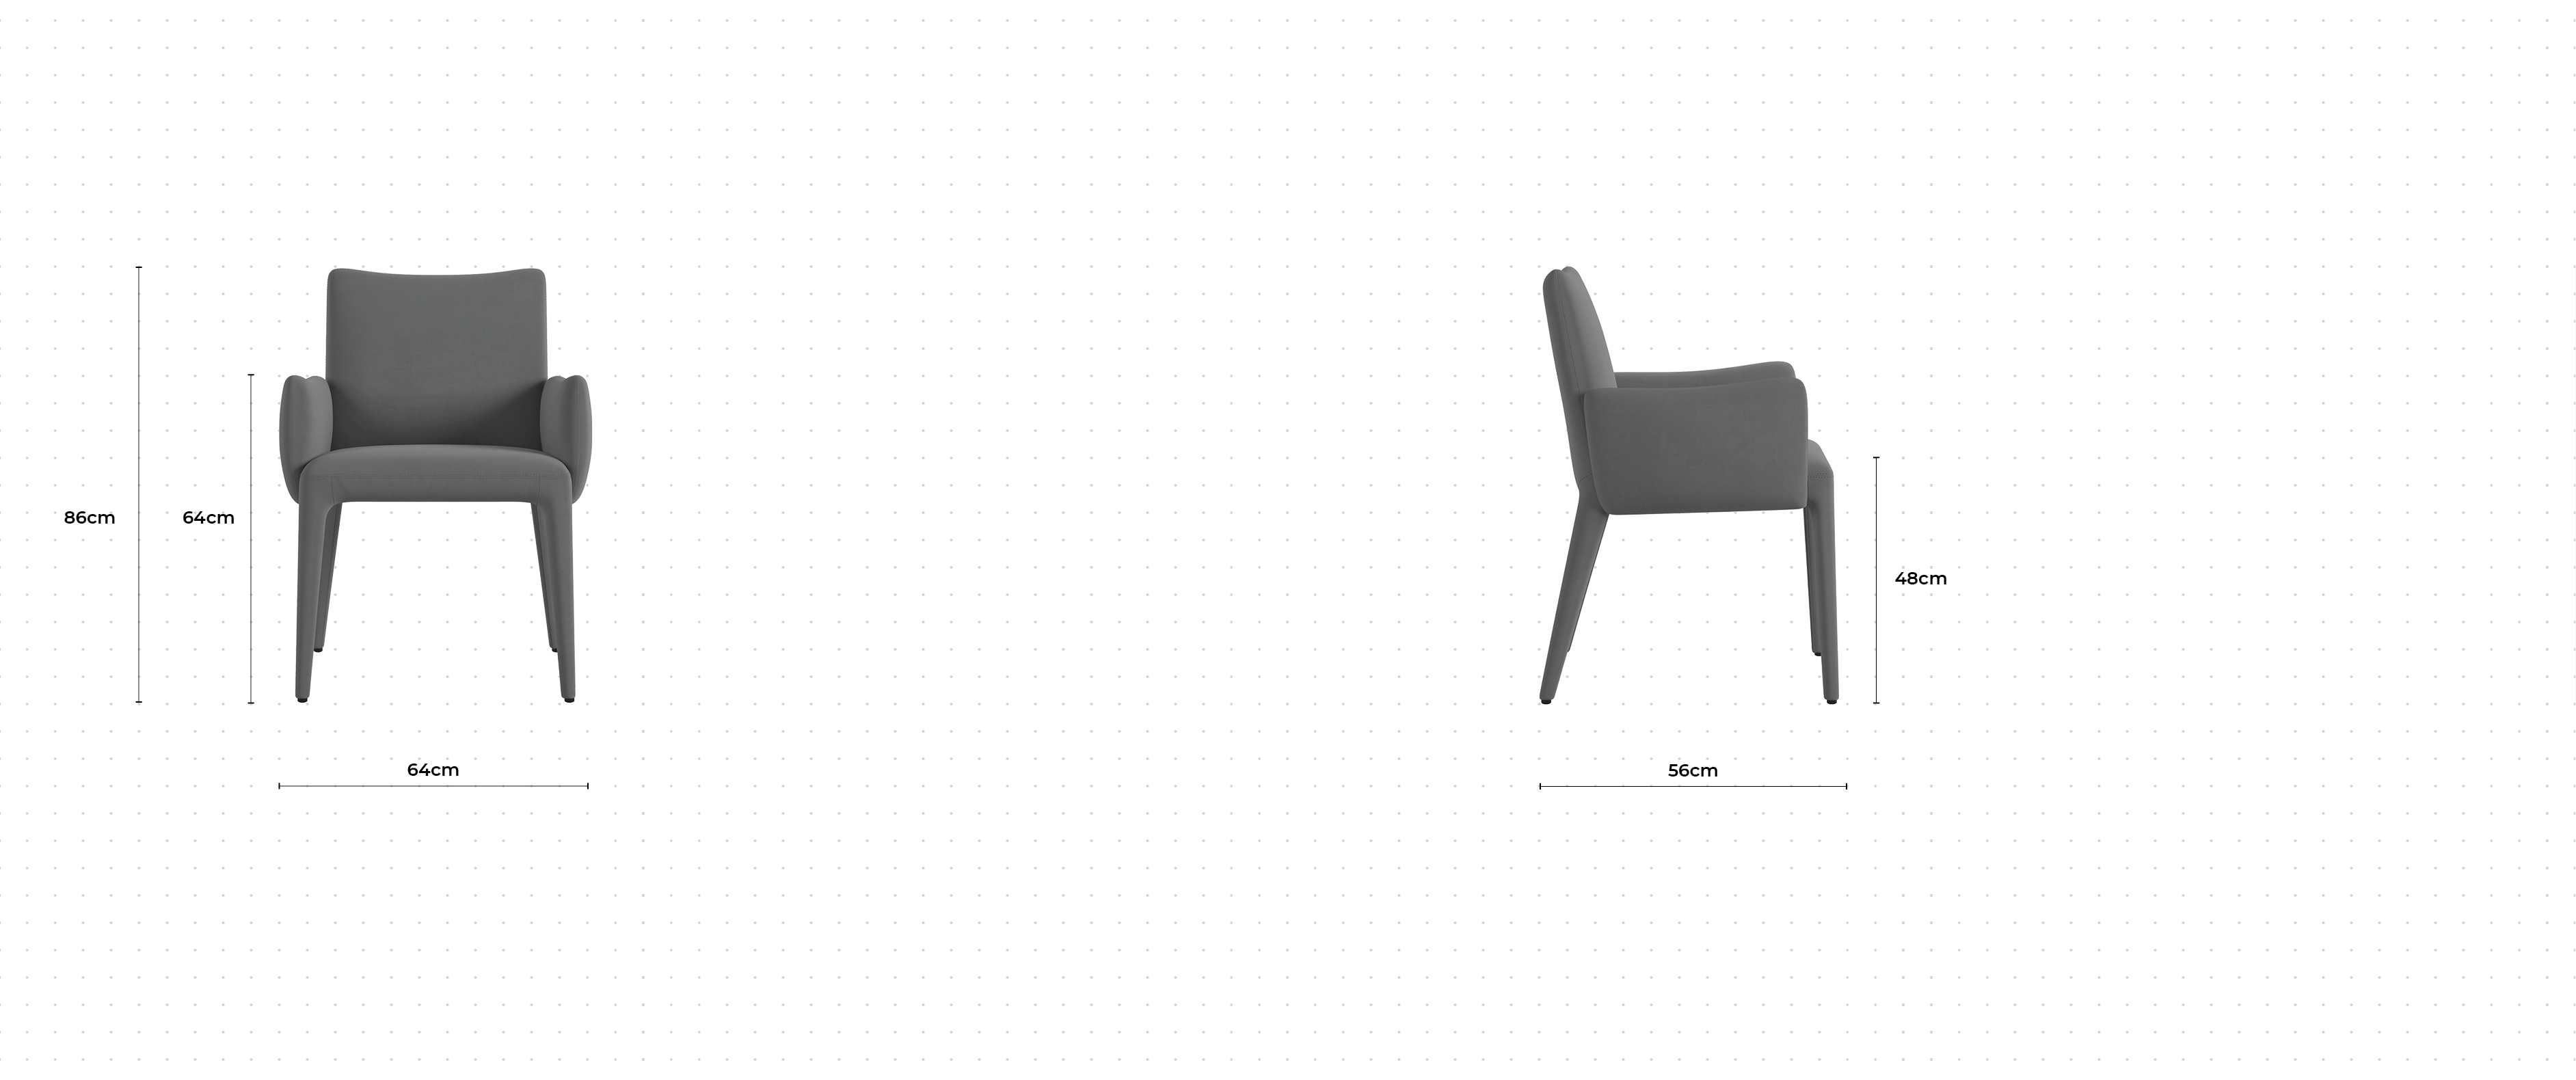 Monza Dining Armchair dimensions